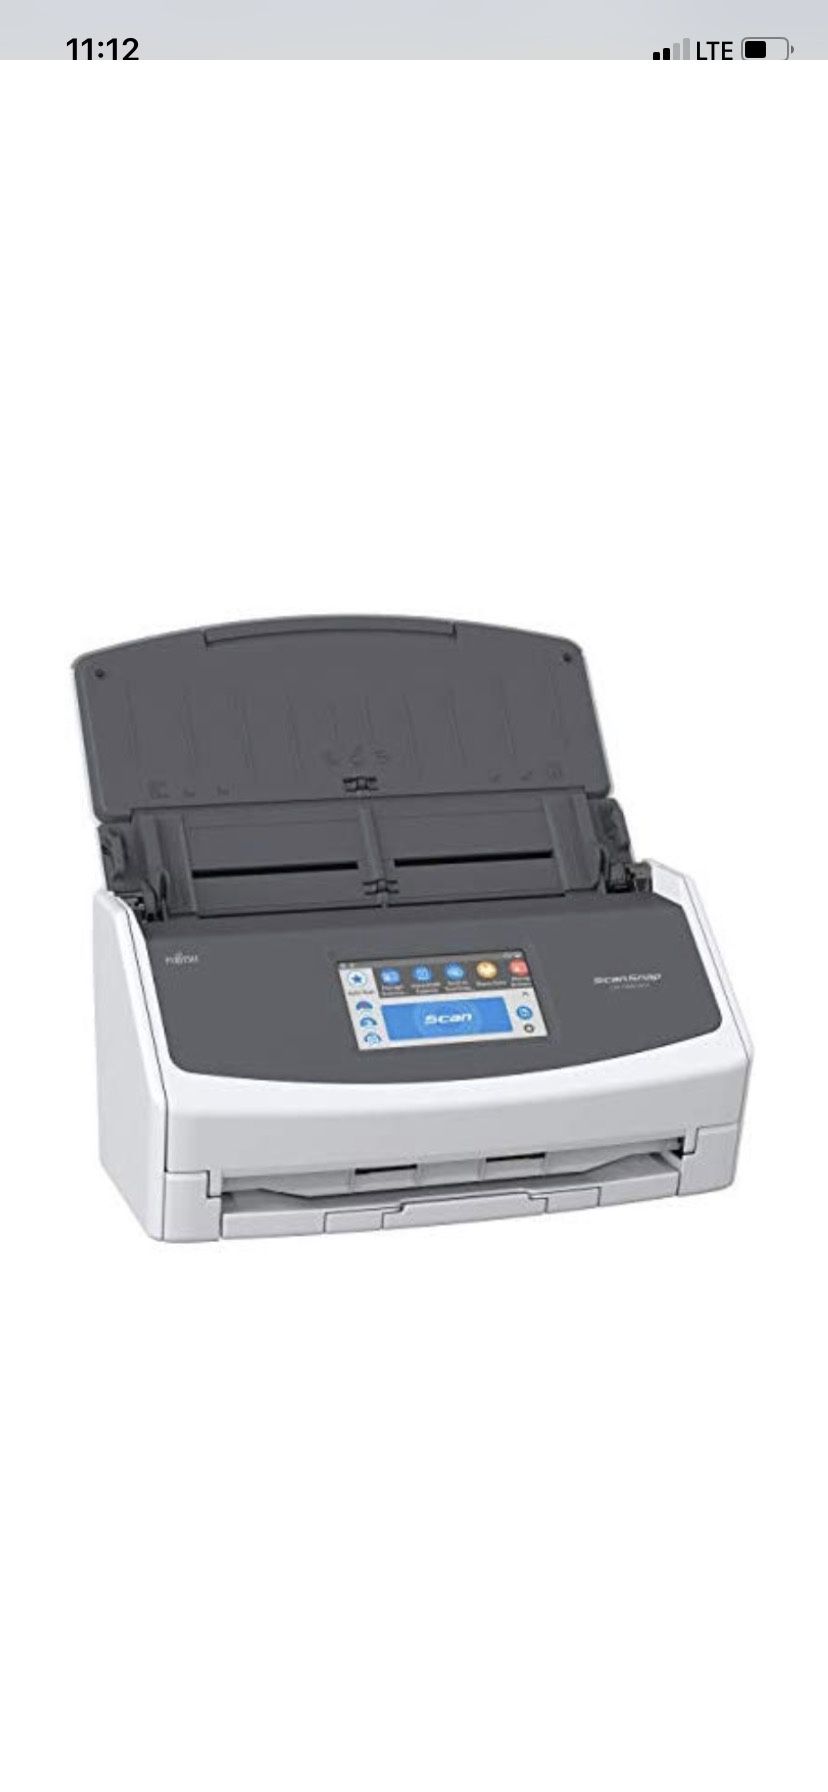 Fujitsu ScanSnap iX1500 Color Duplex Document Scanner with Touch